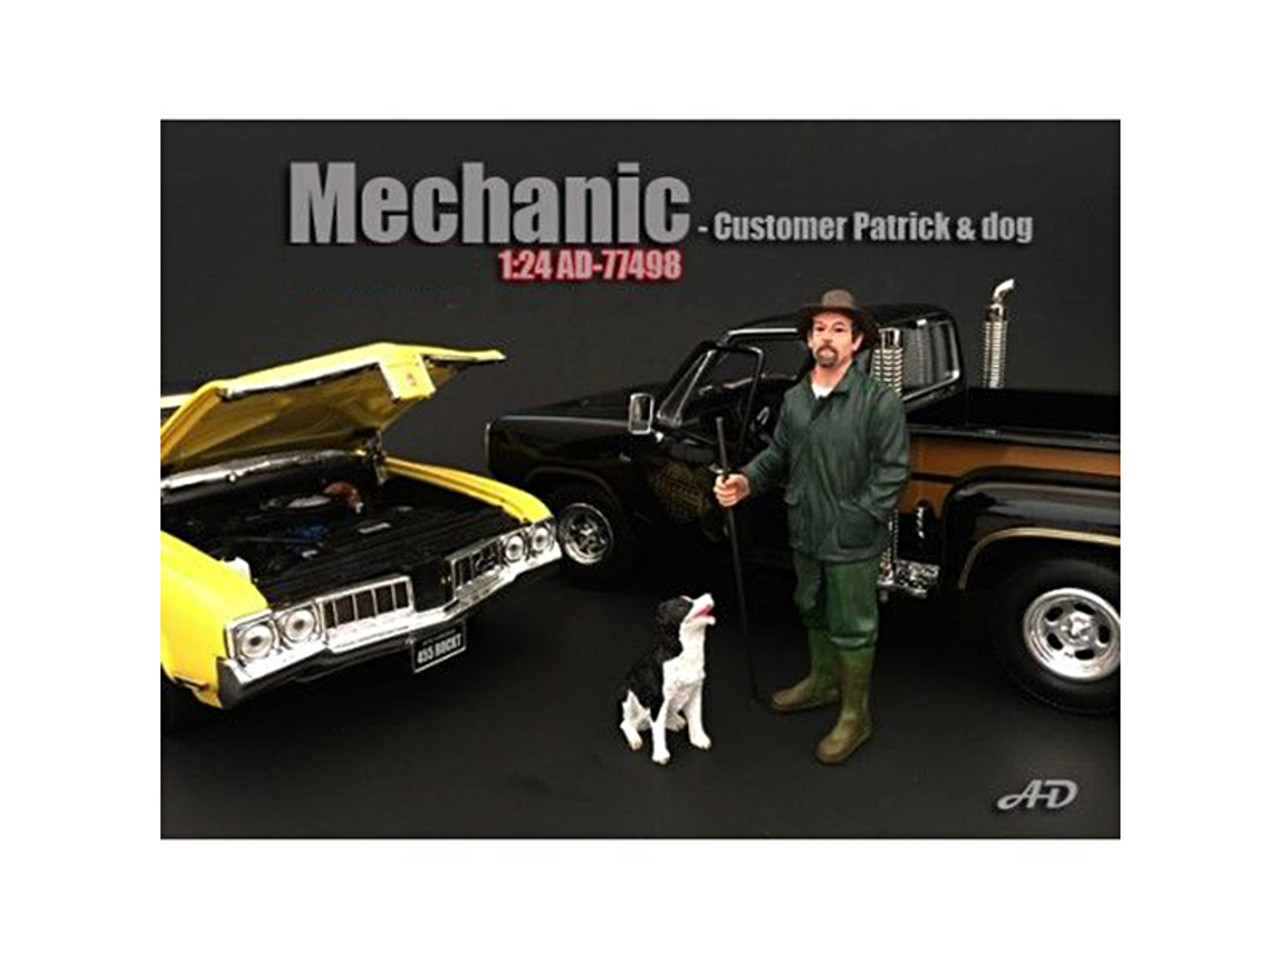 Customer Patrick and a Dog Figurine / Figure For 1/24 Models by American Diorama